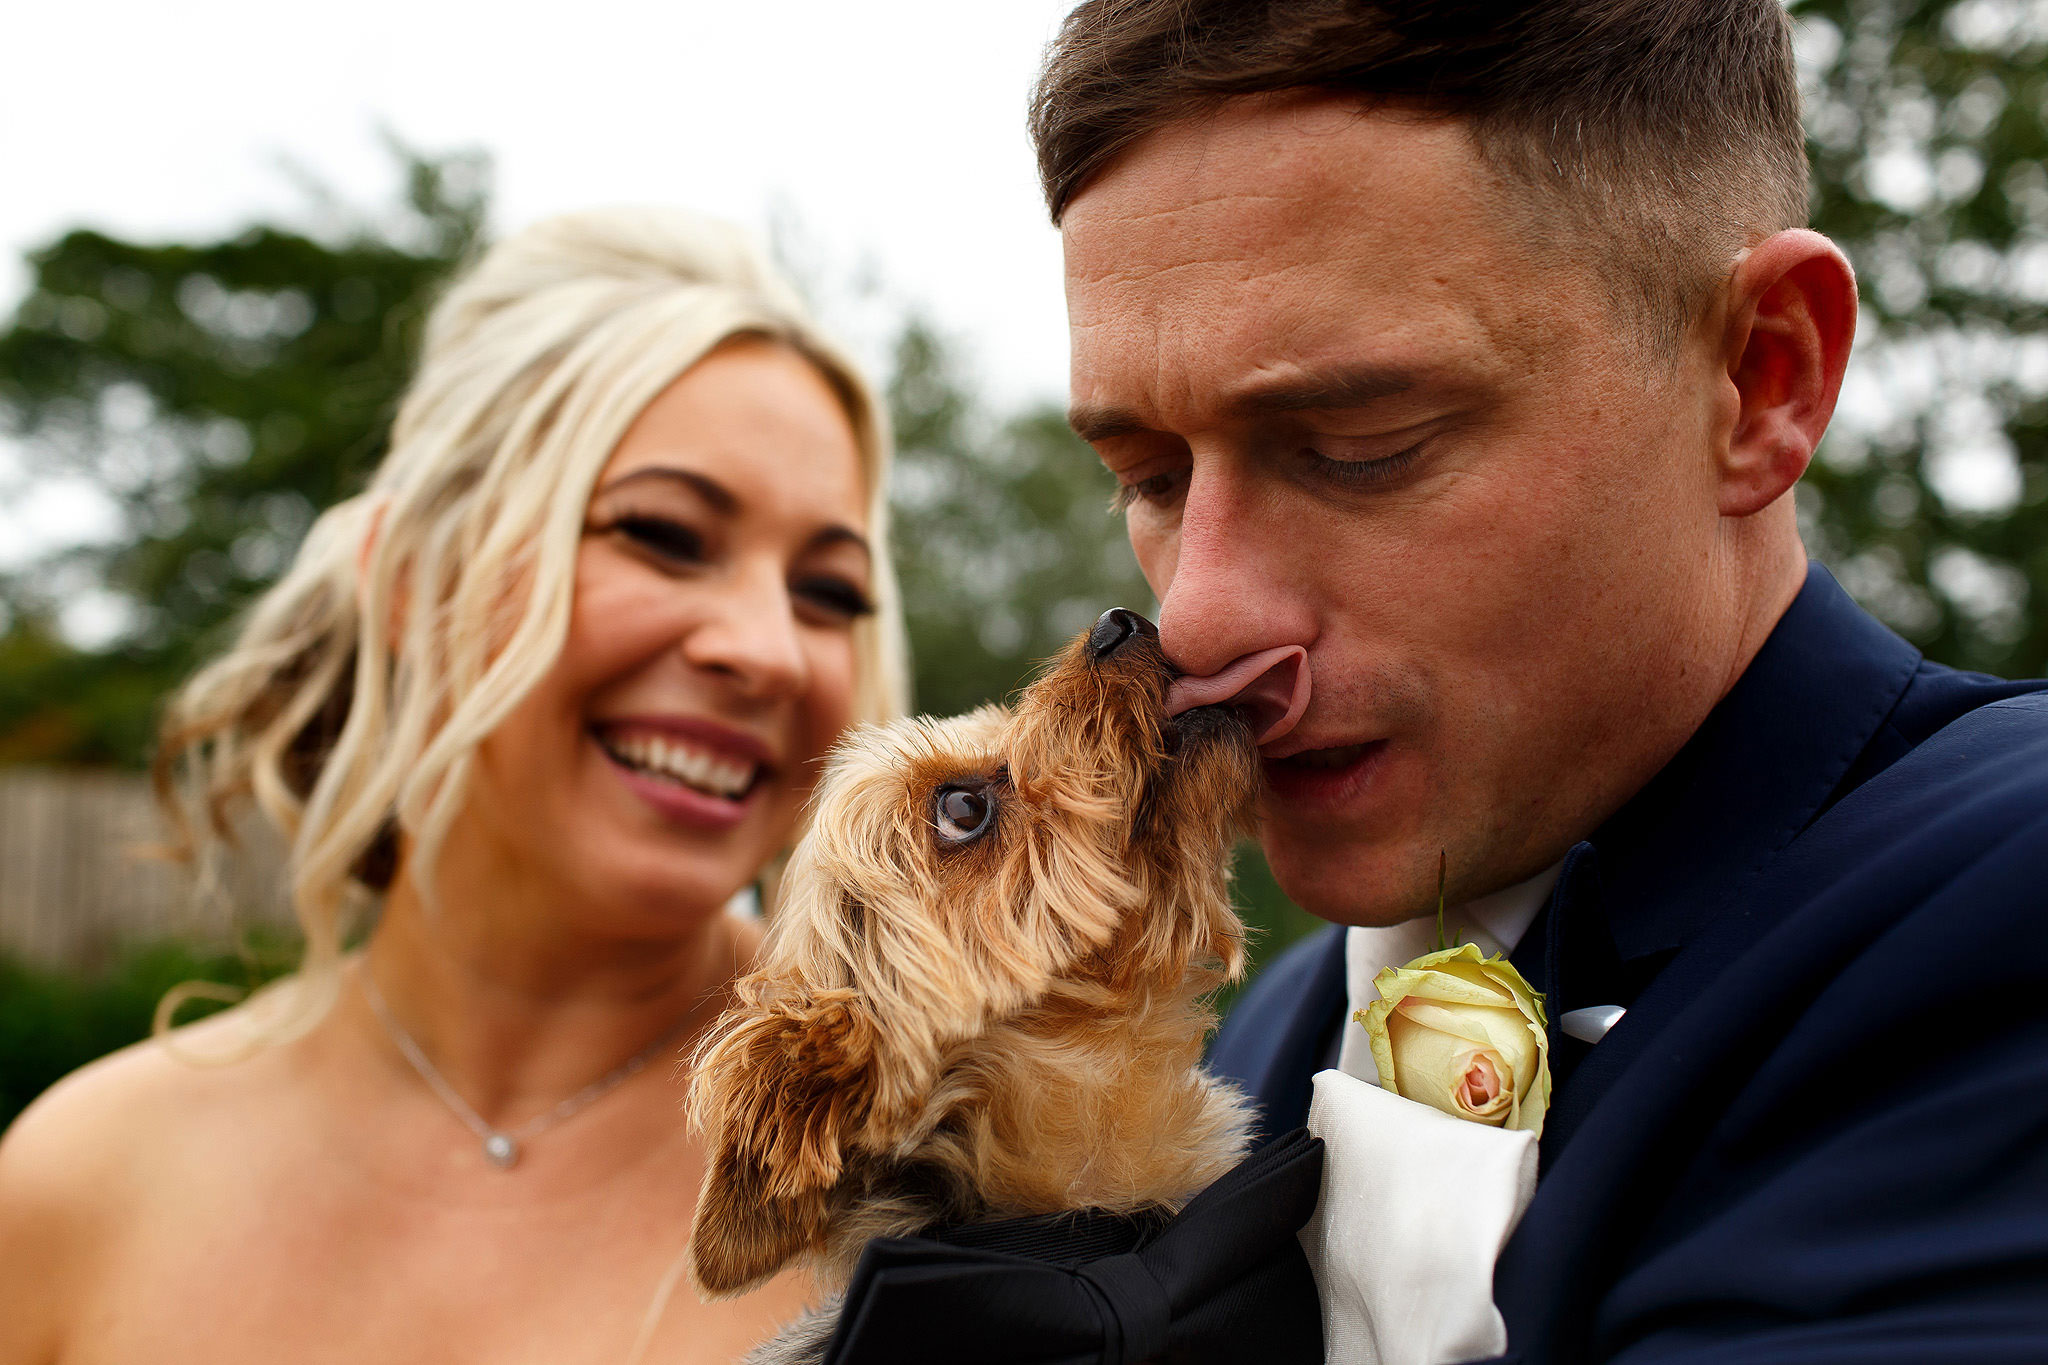 Bride with blonde hair laughing as small brown dog licks the groom on the nose at Hurlston Hall wedding